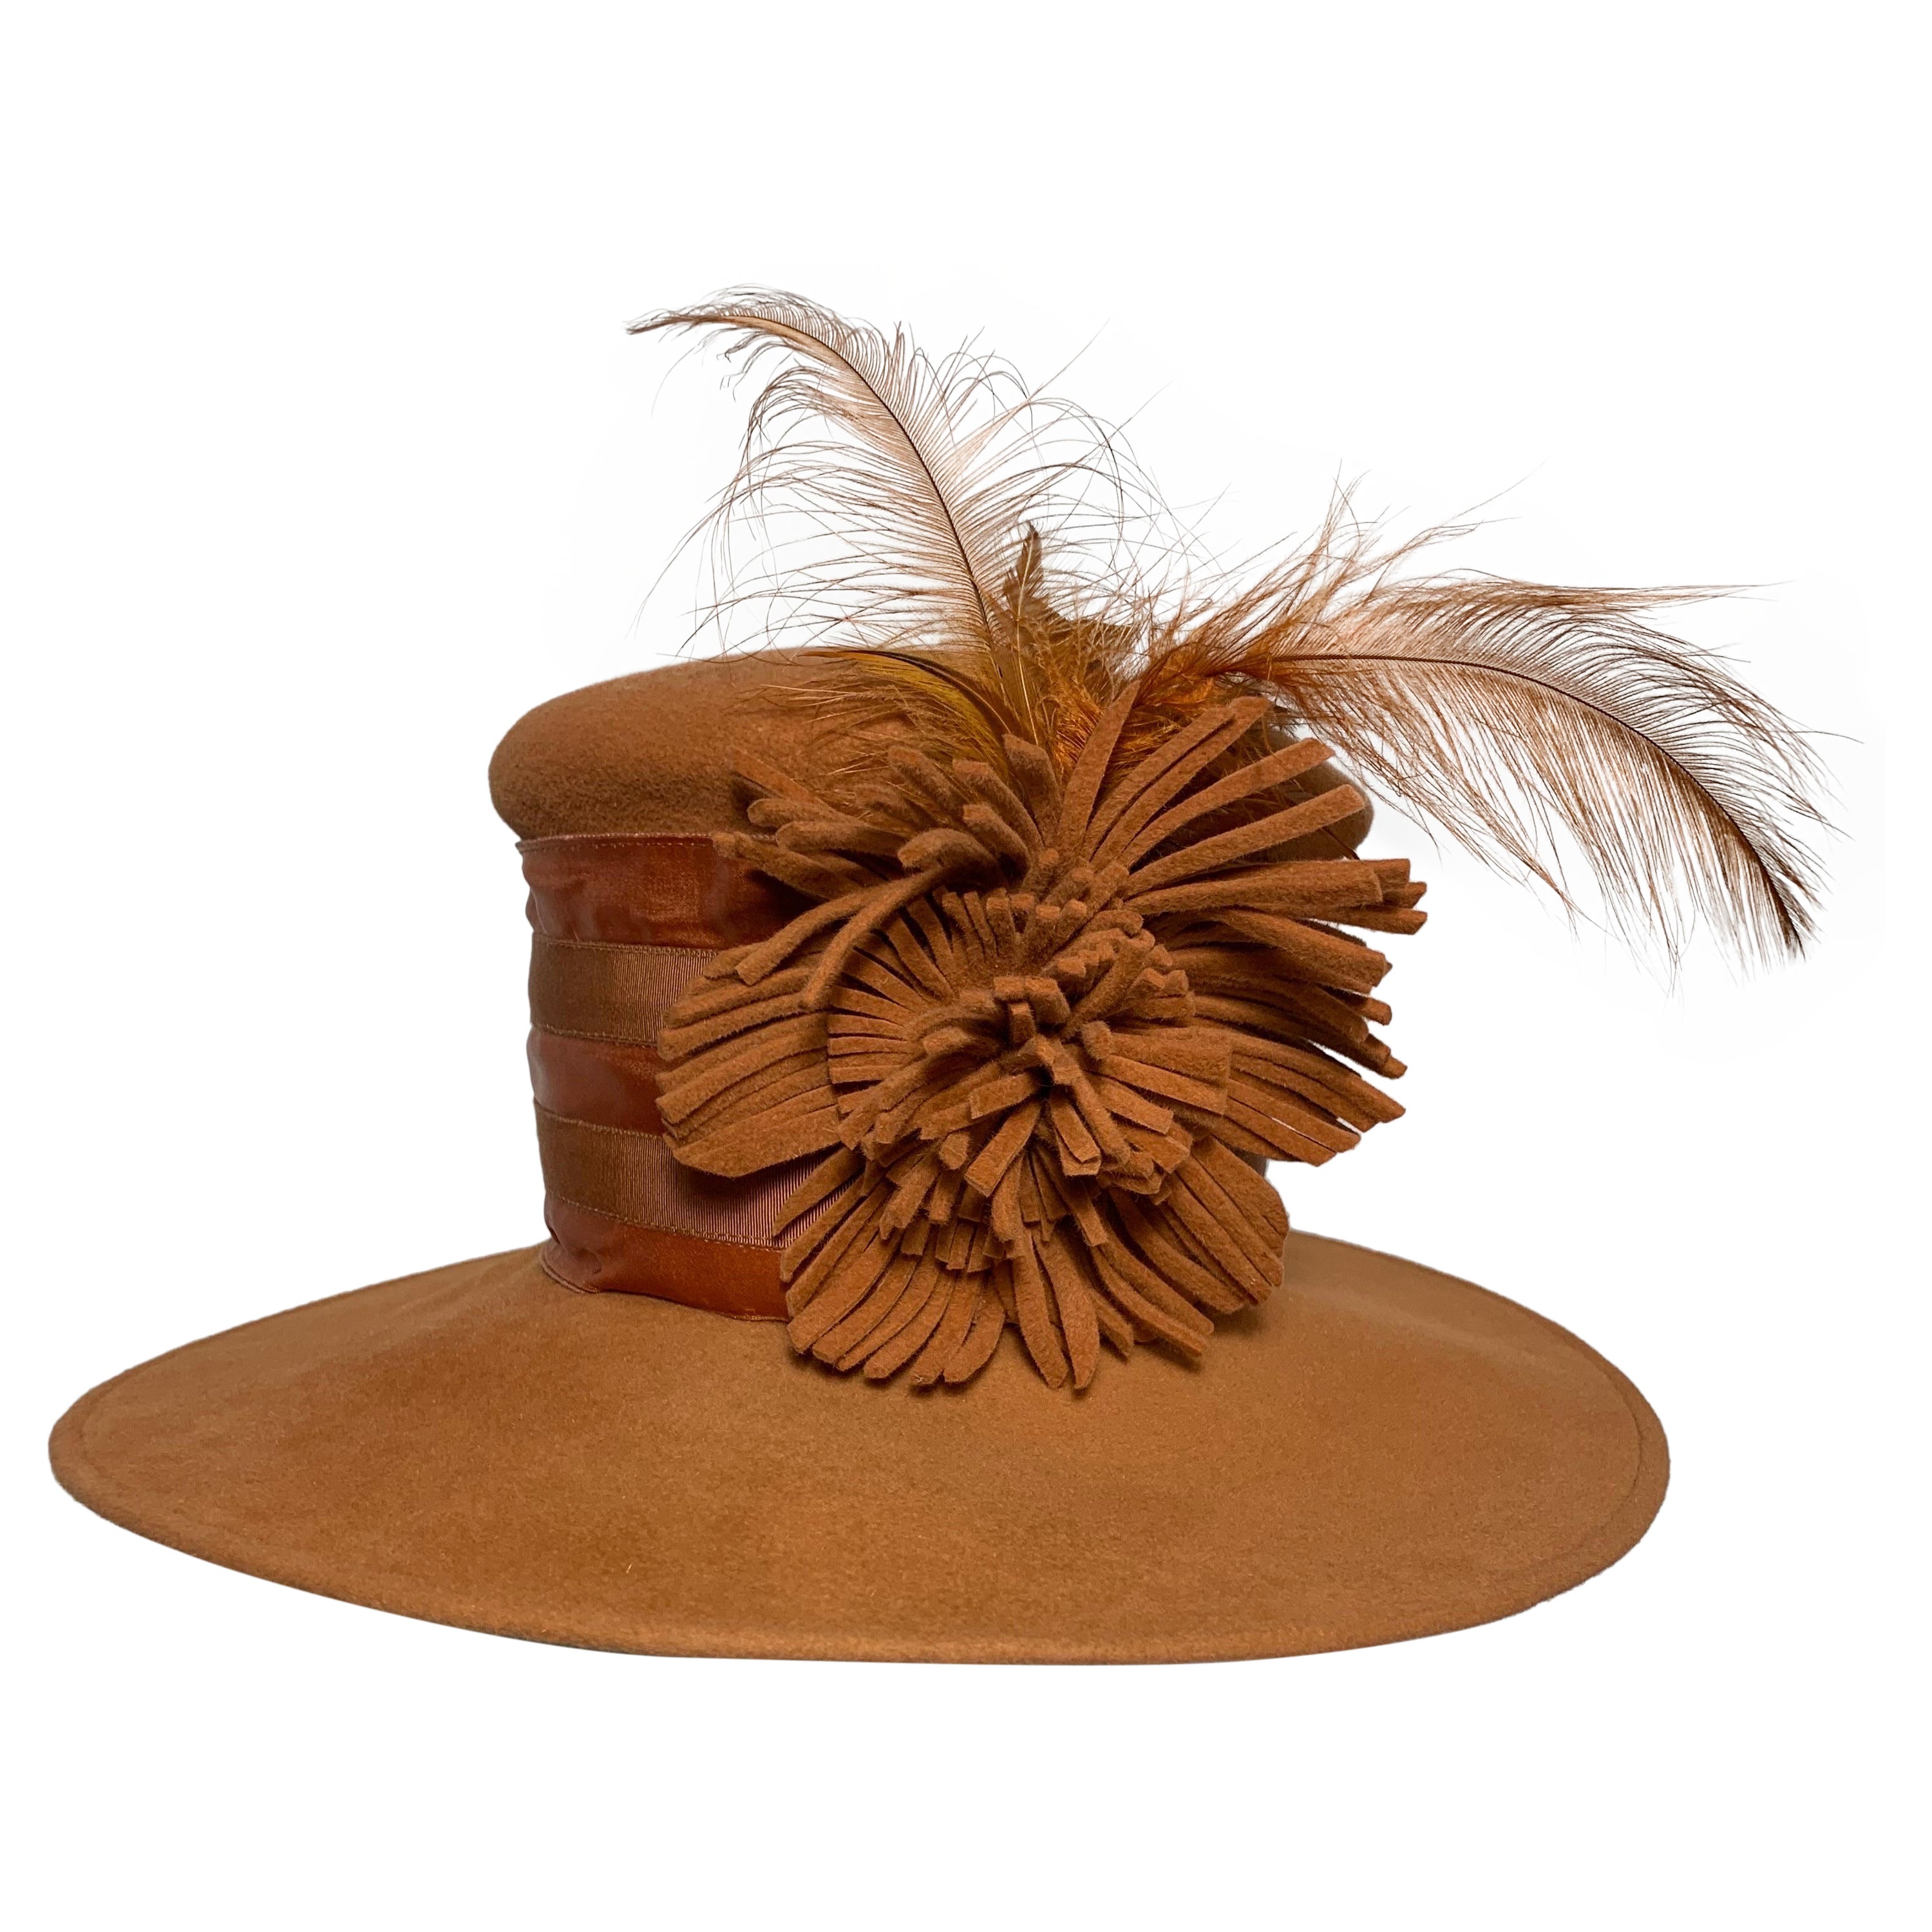 What is a hat with a feather called?